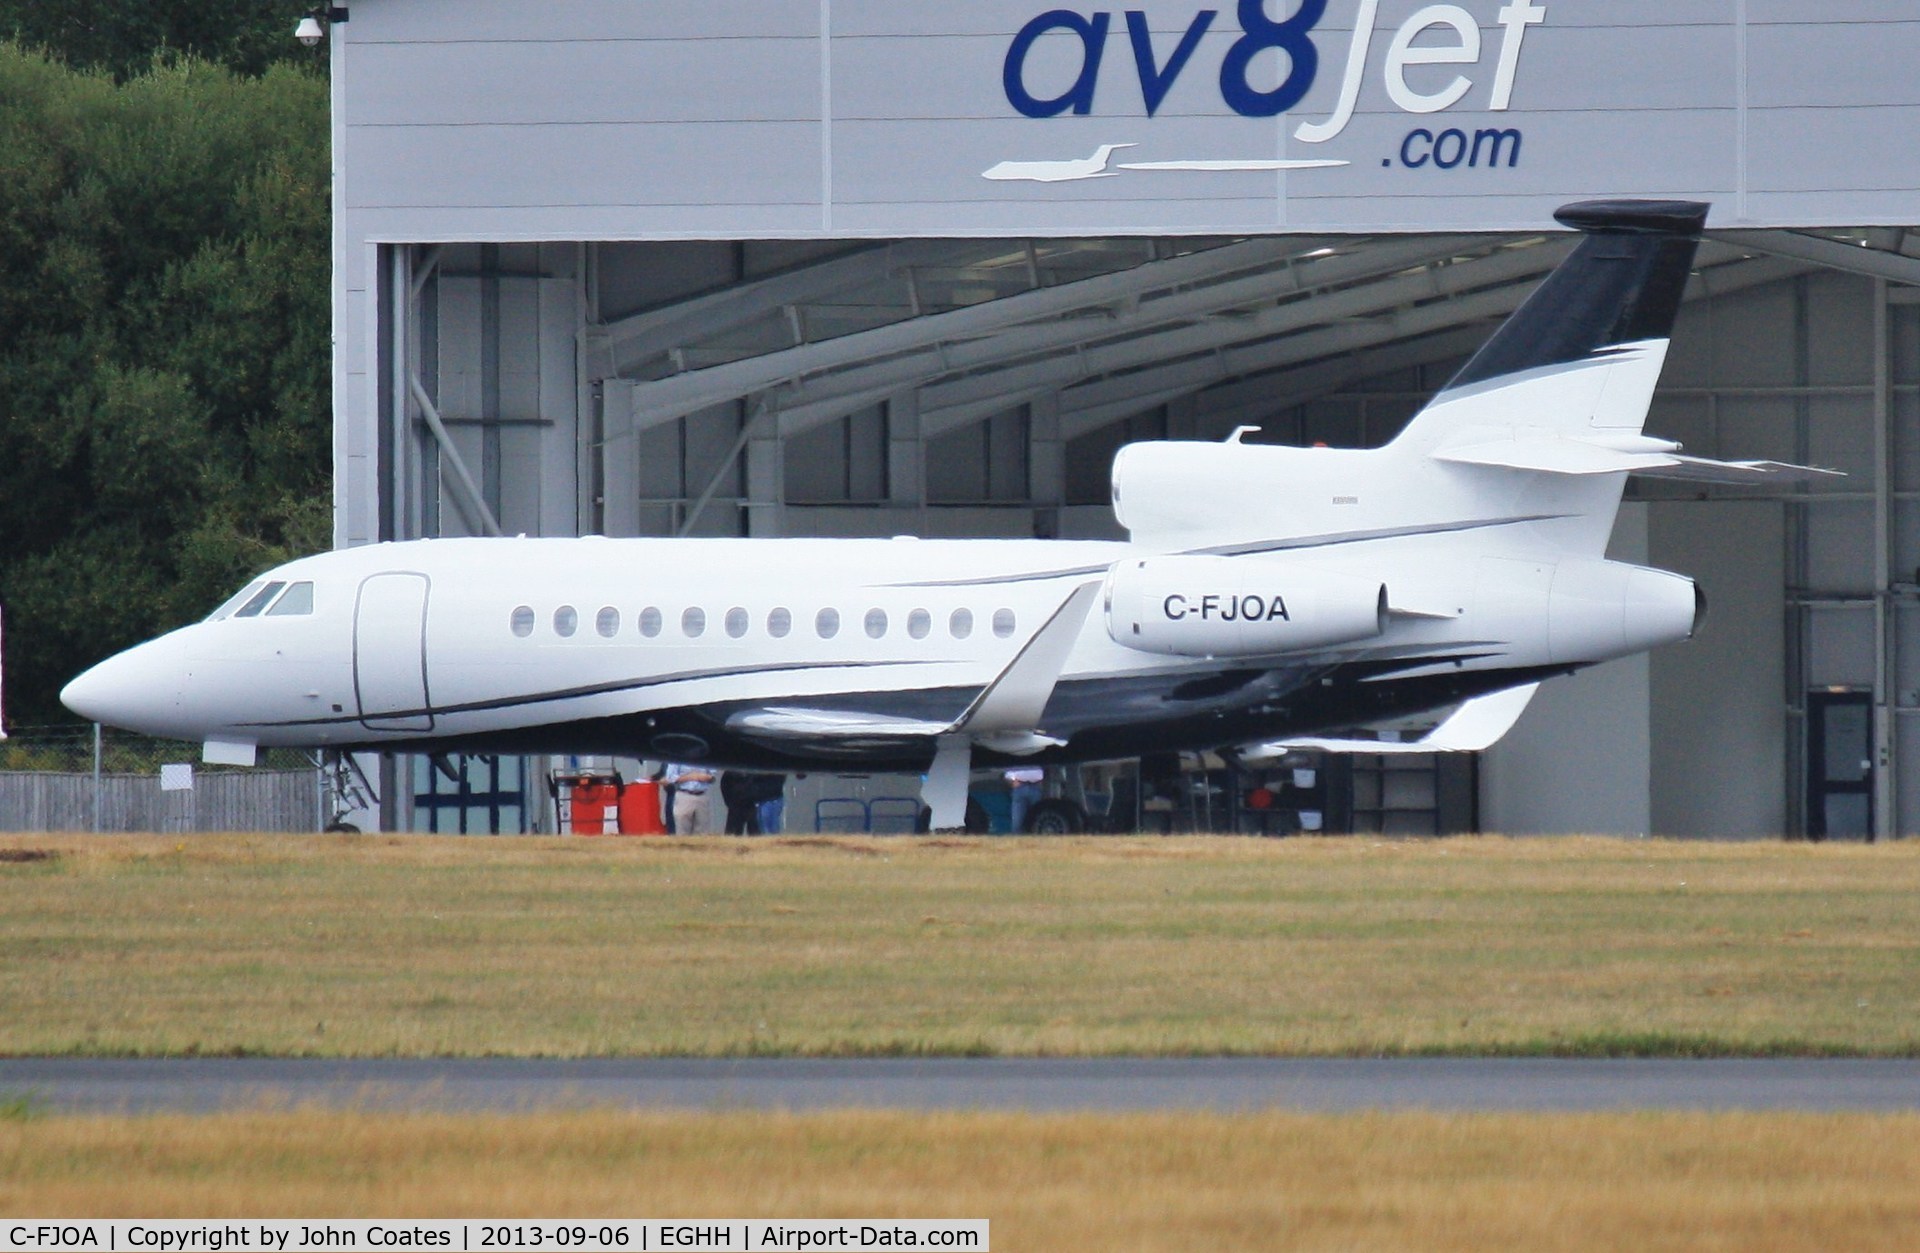 C-FJOA, 2007 Dassault Falcon 900EX C/N 180, ex M-ROWL about to be delivered to Canada